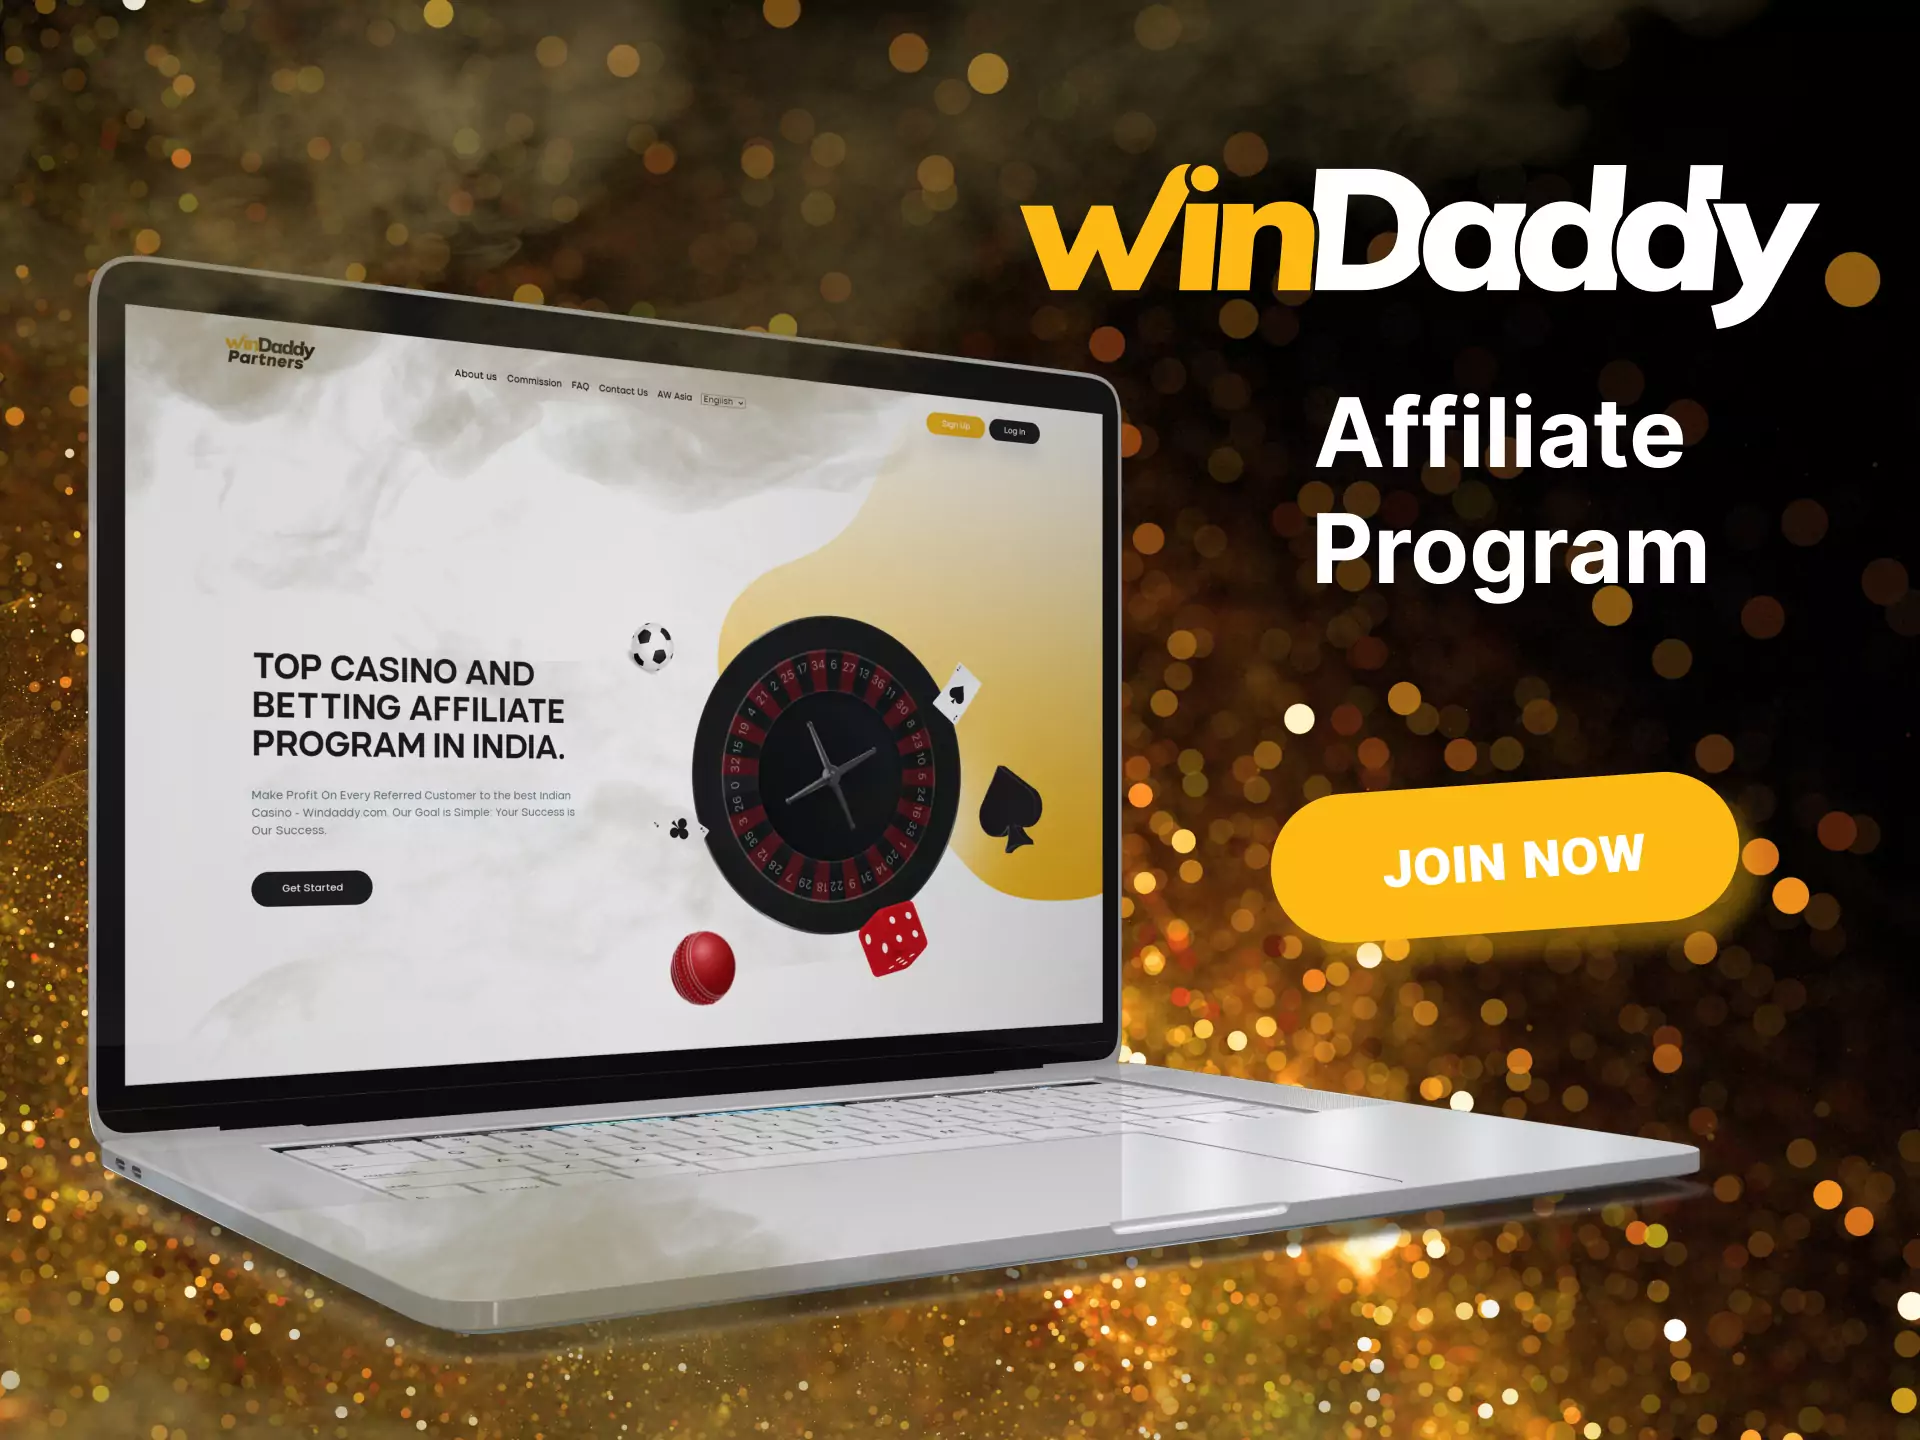 Windaddy offers favorable conditions for partners, try it.